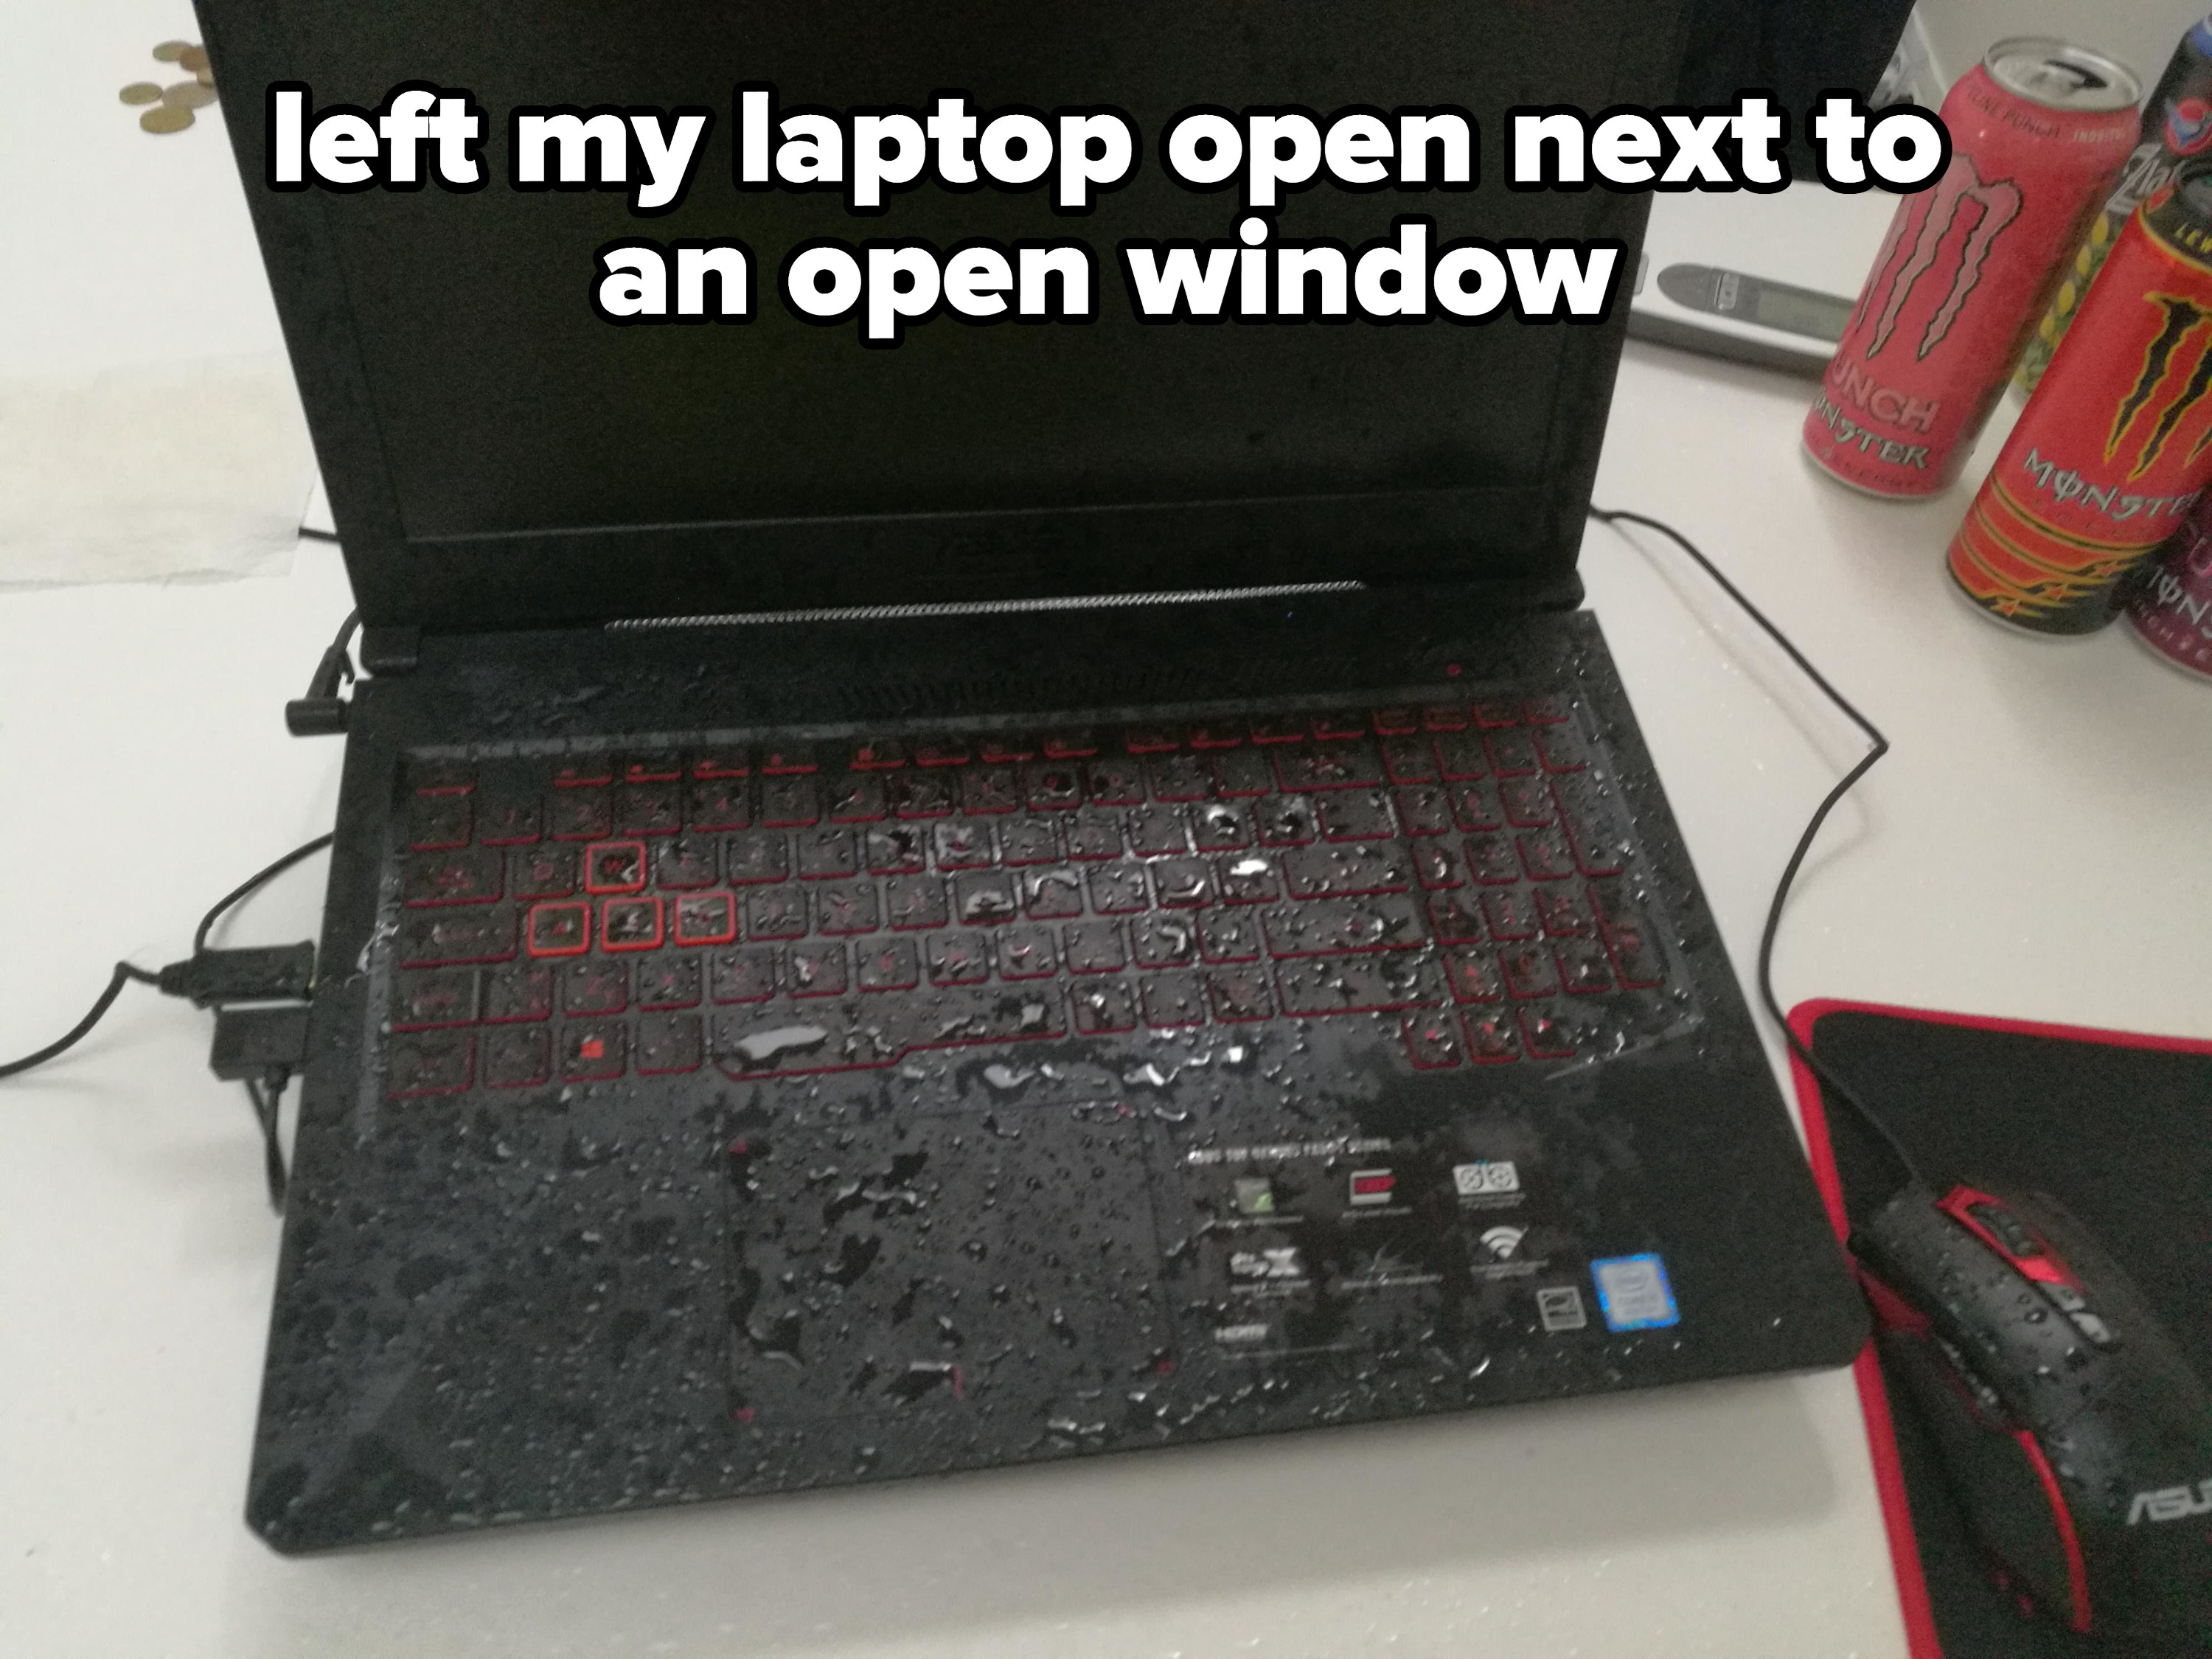 The keyboard of a laptop left next to an open window with water on it